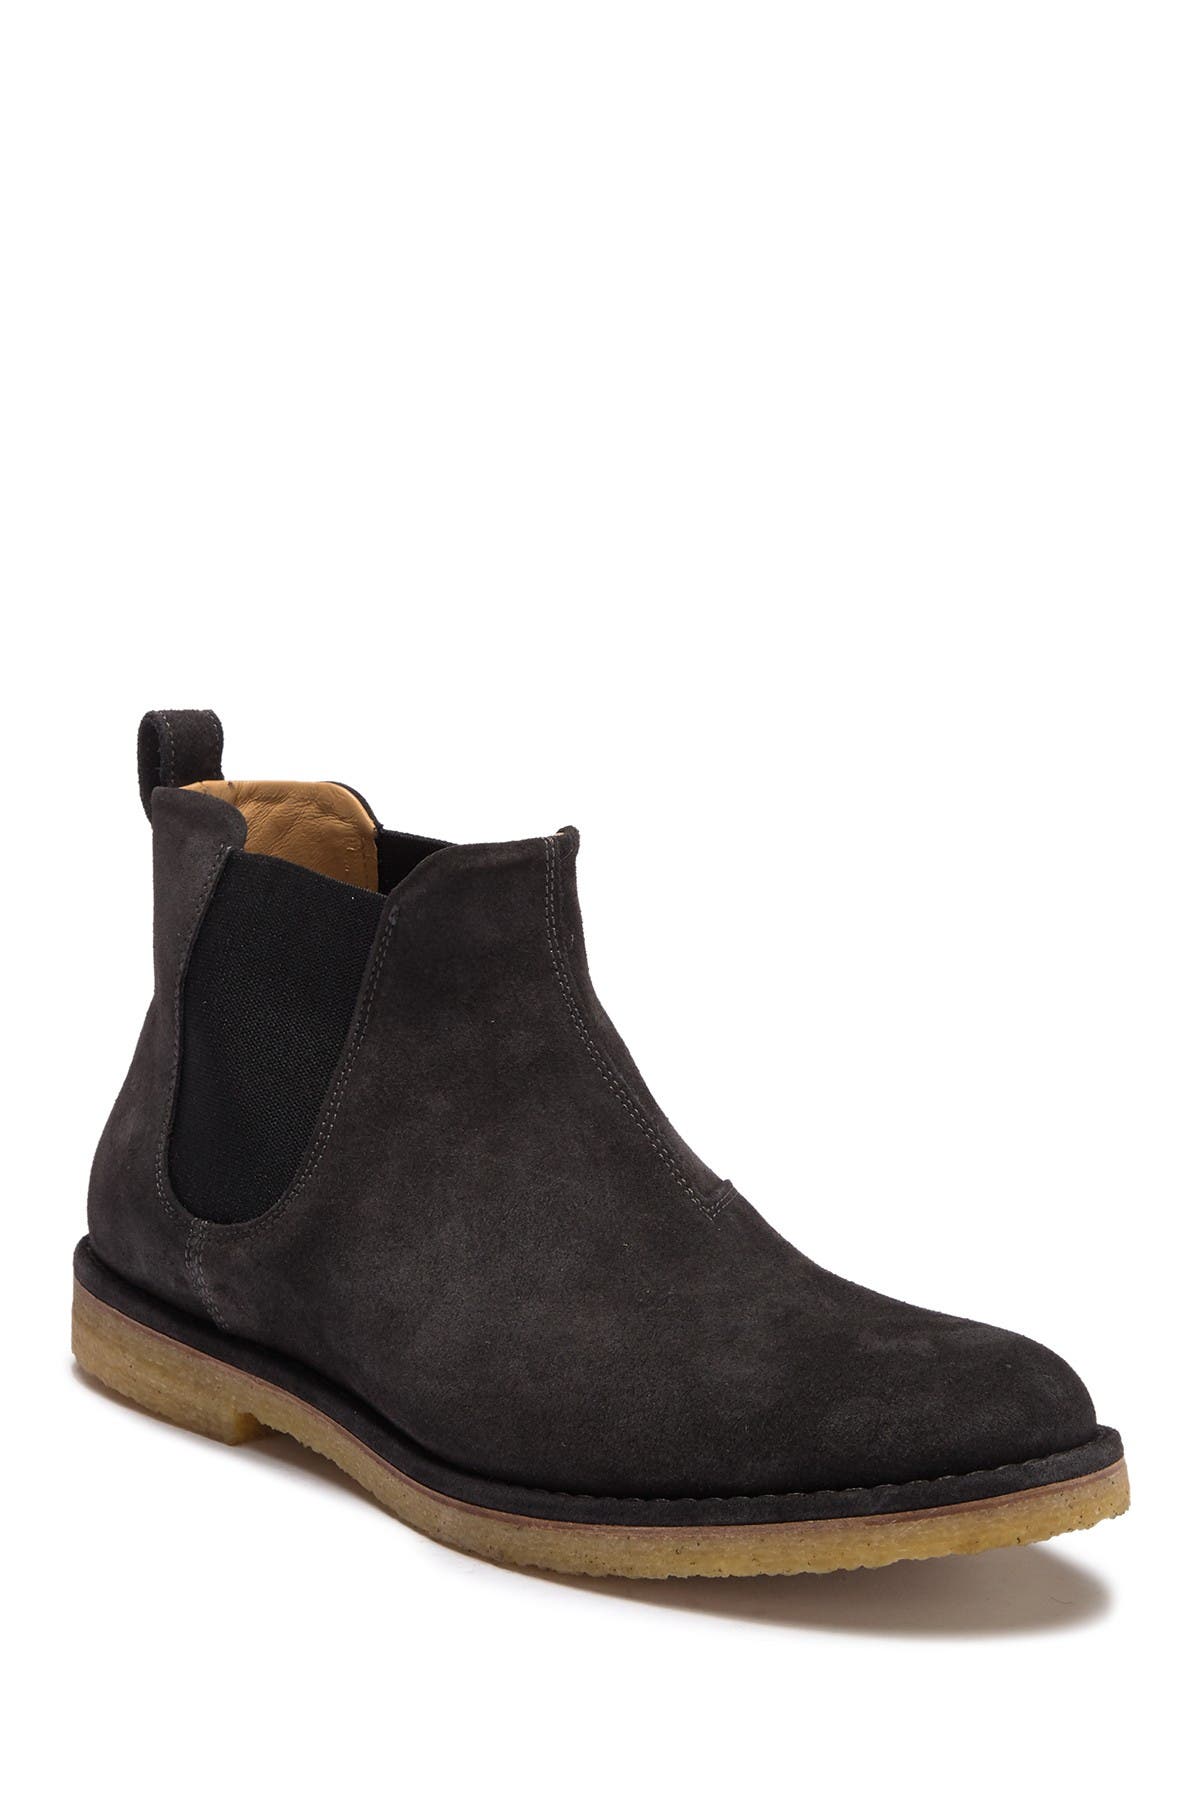 Vince | Sawyer Suede Chelsea Boot 